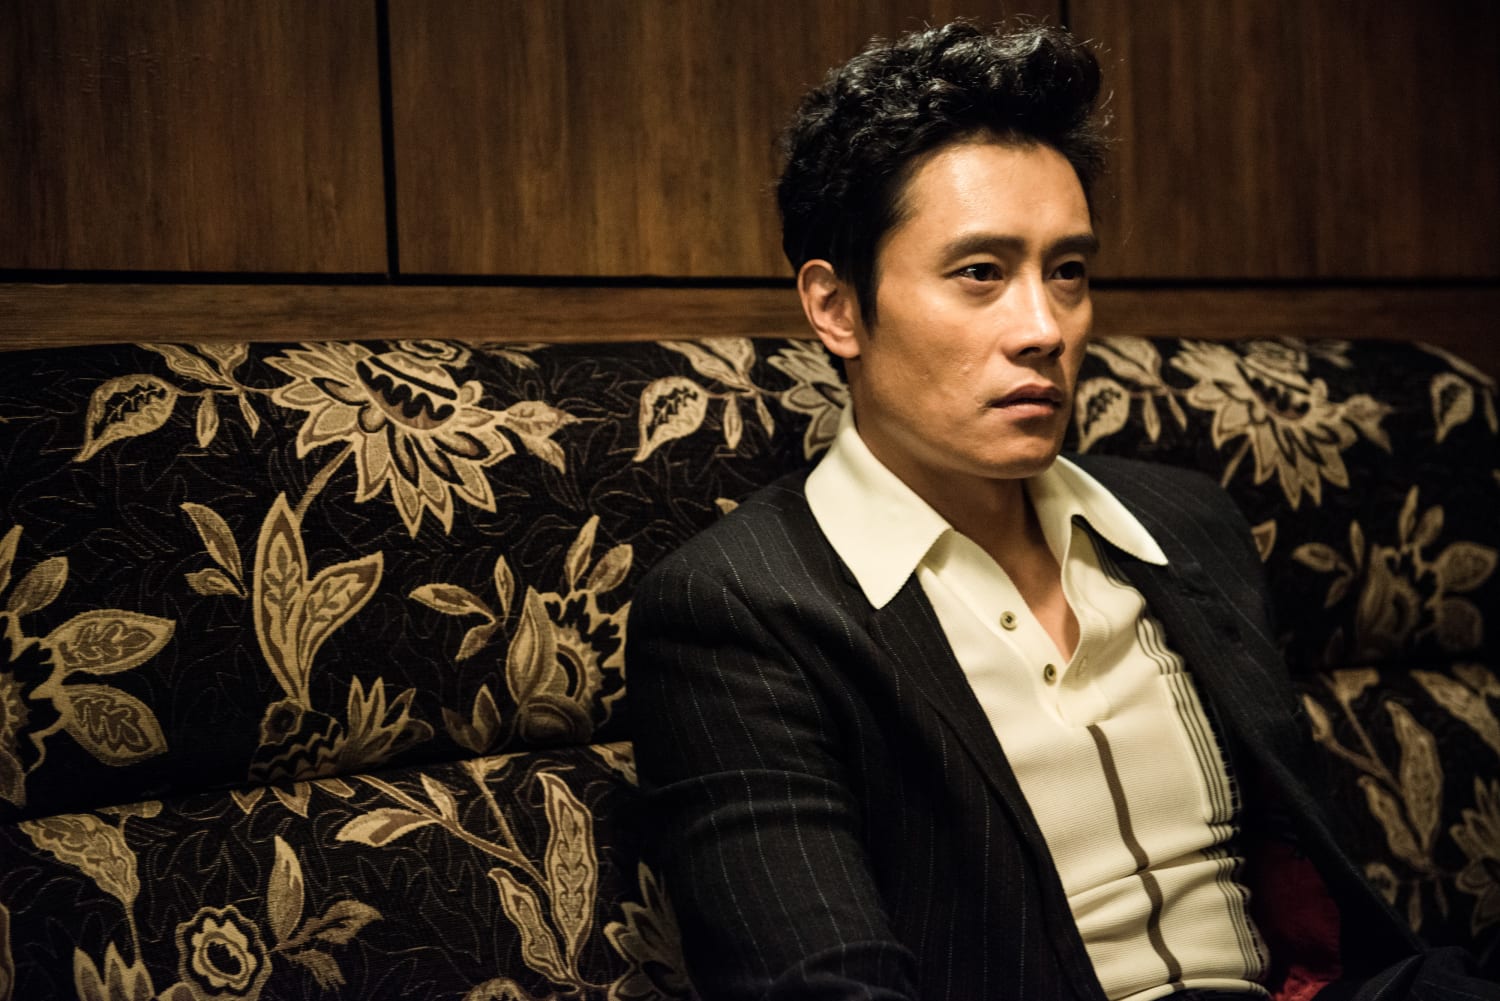 Actor Lee Byung-hun Takes on Corruption in 'Inside Men'